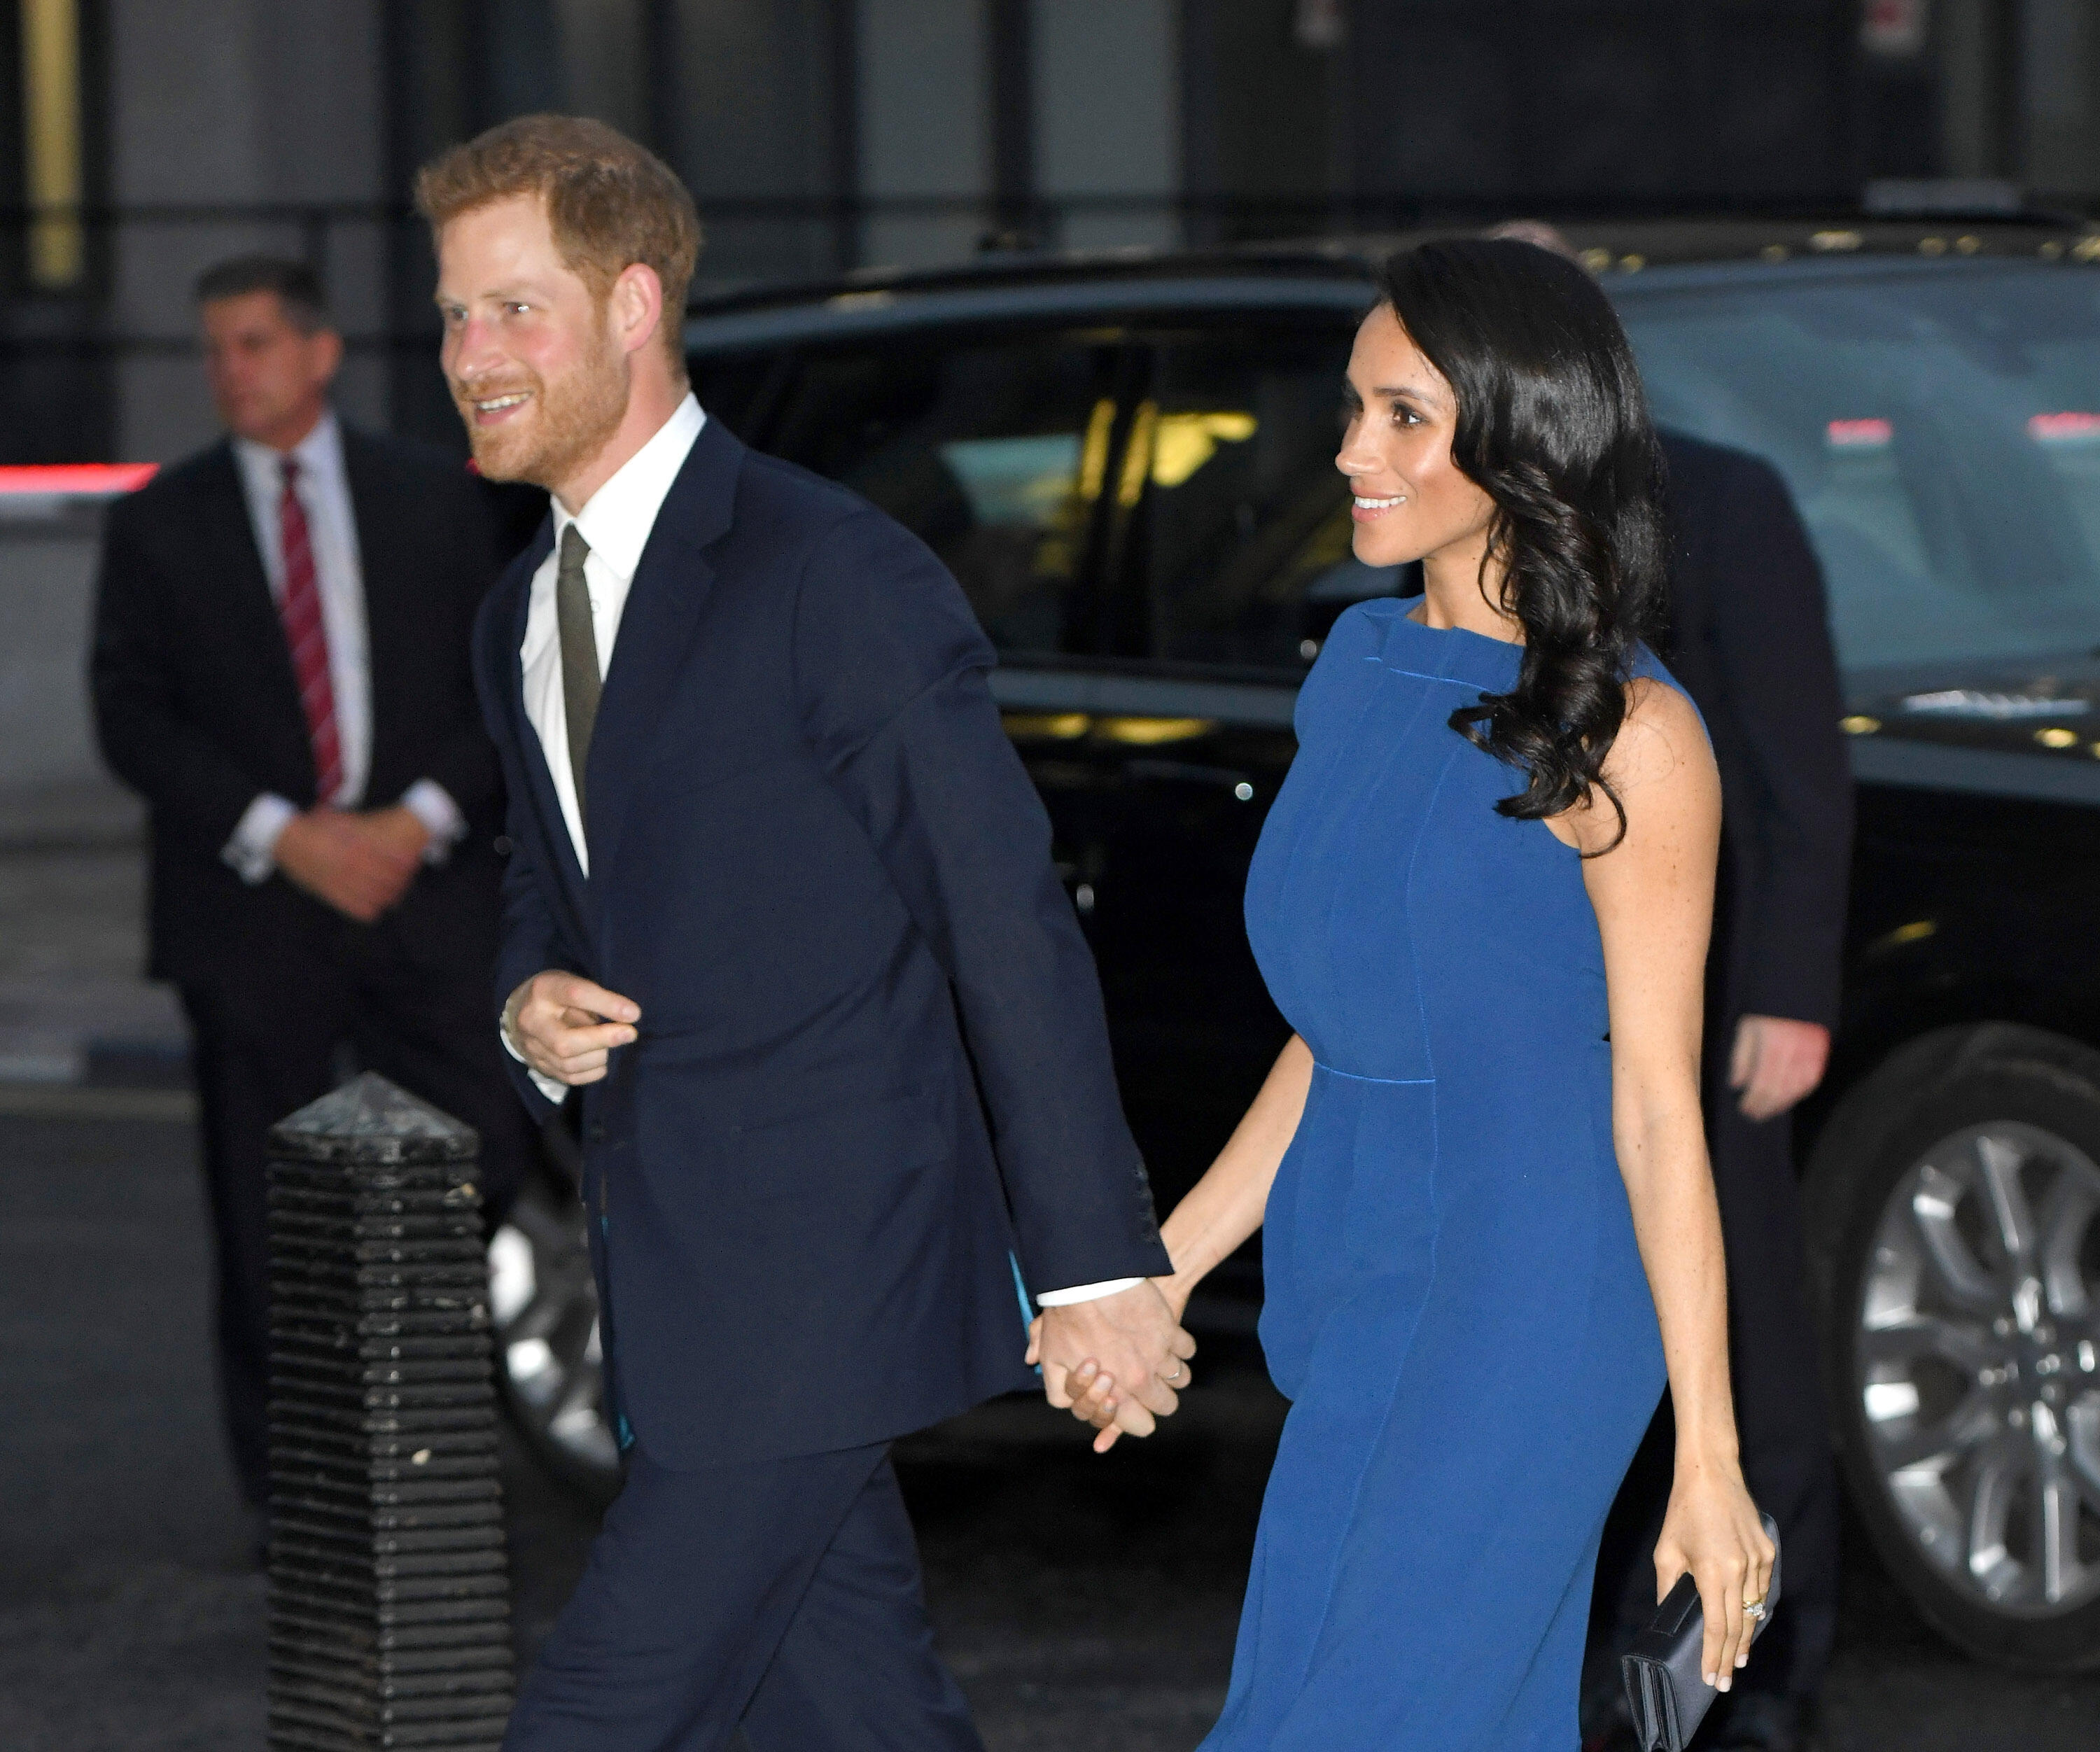 Is Meghan Markle Pregnant? This Dress Has Everyone Convinced She's Expecting | iHeartRadio